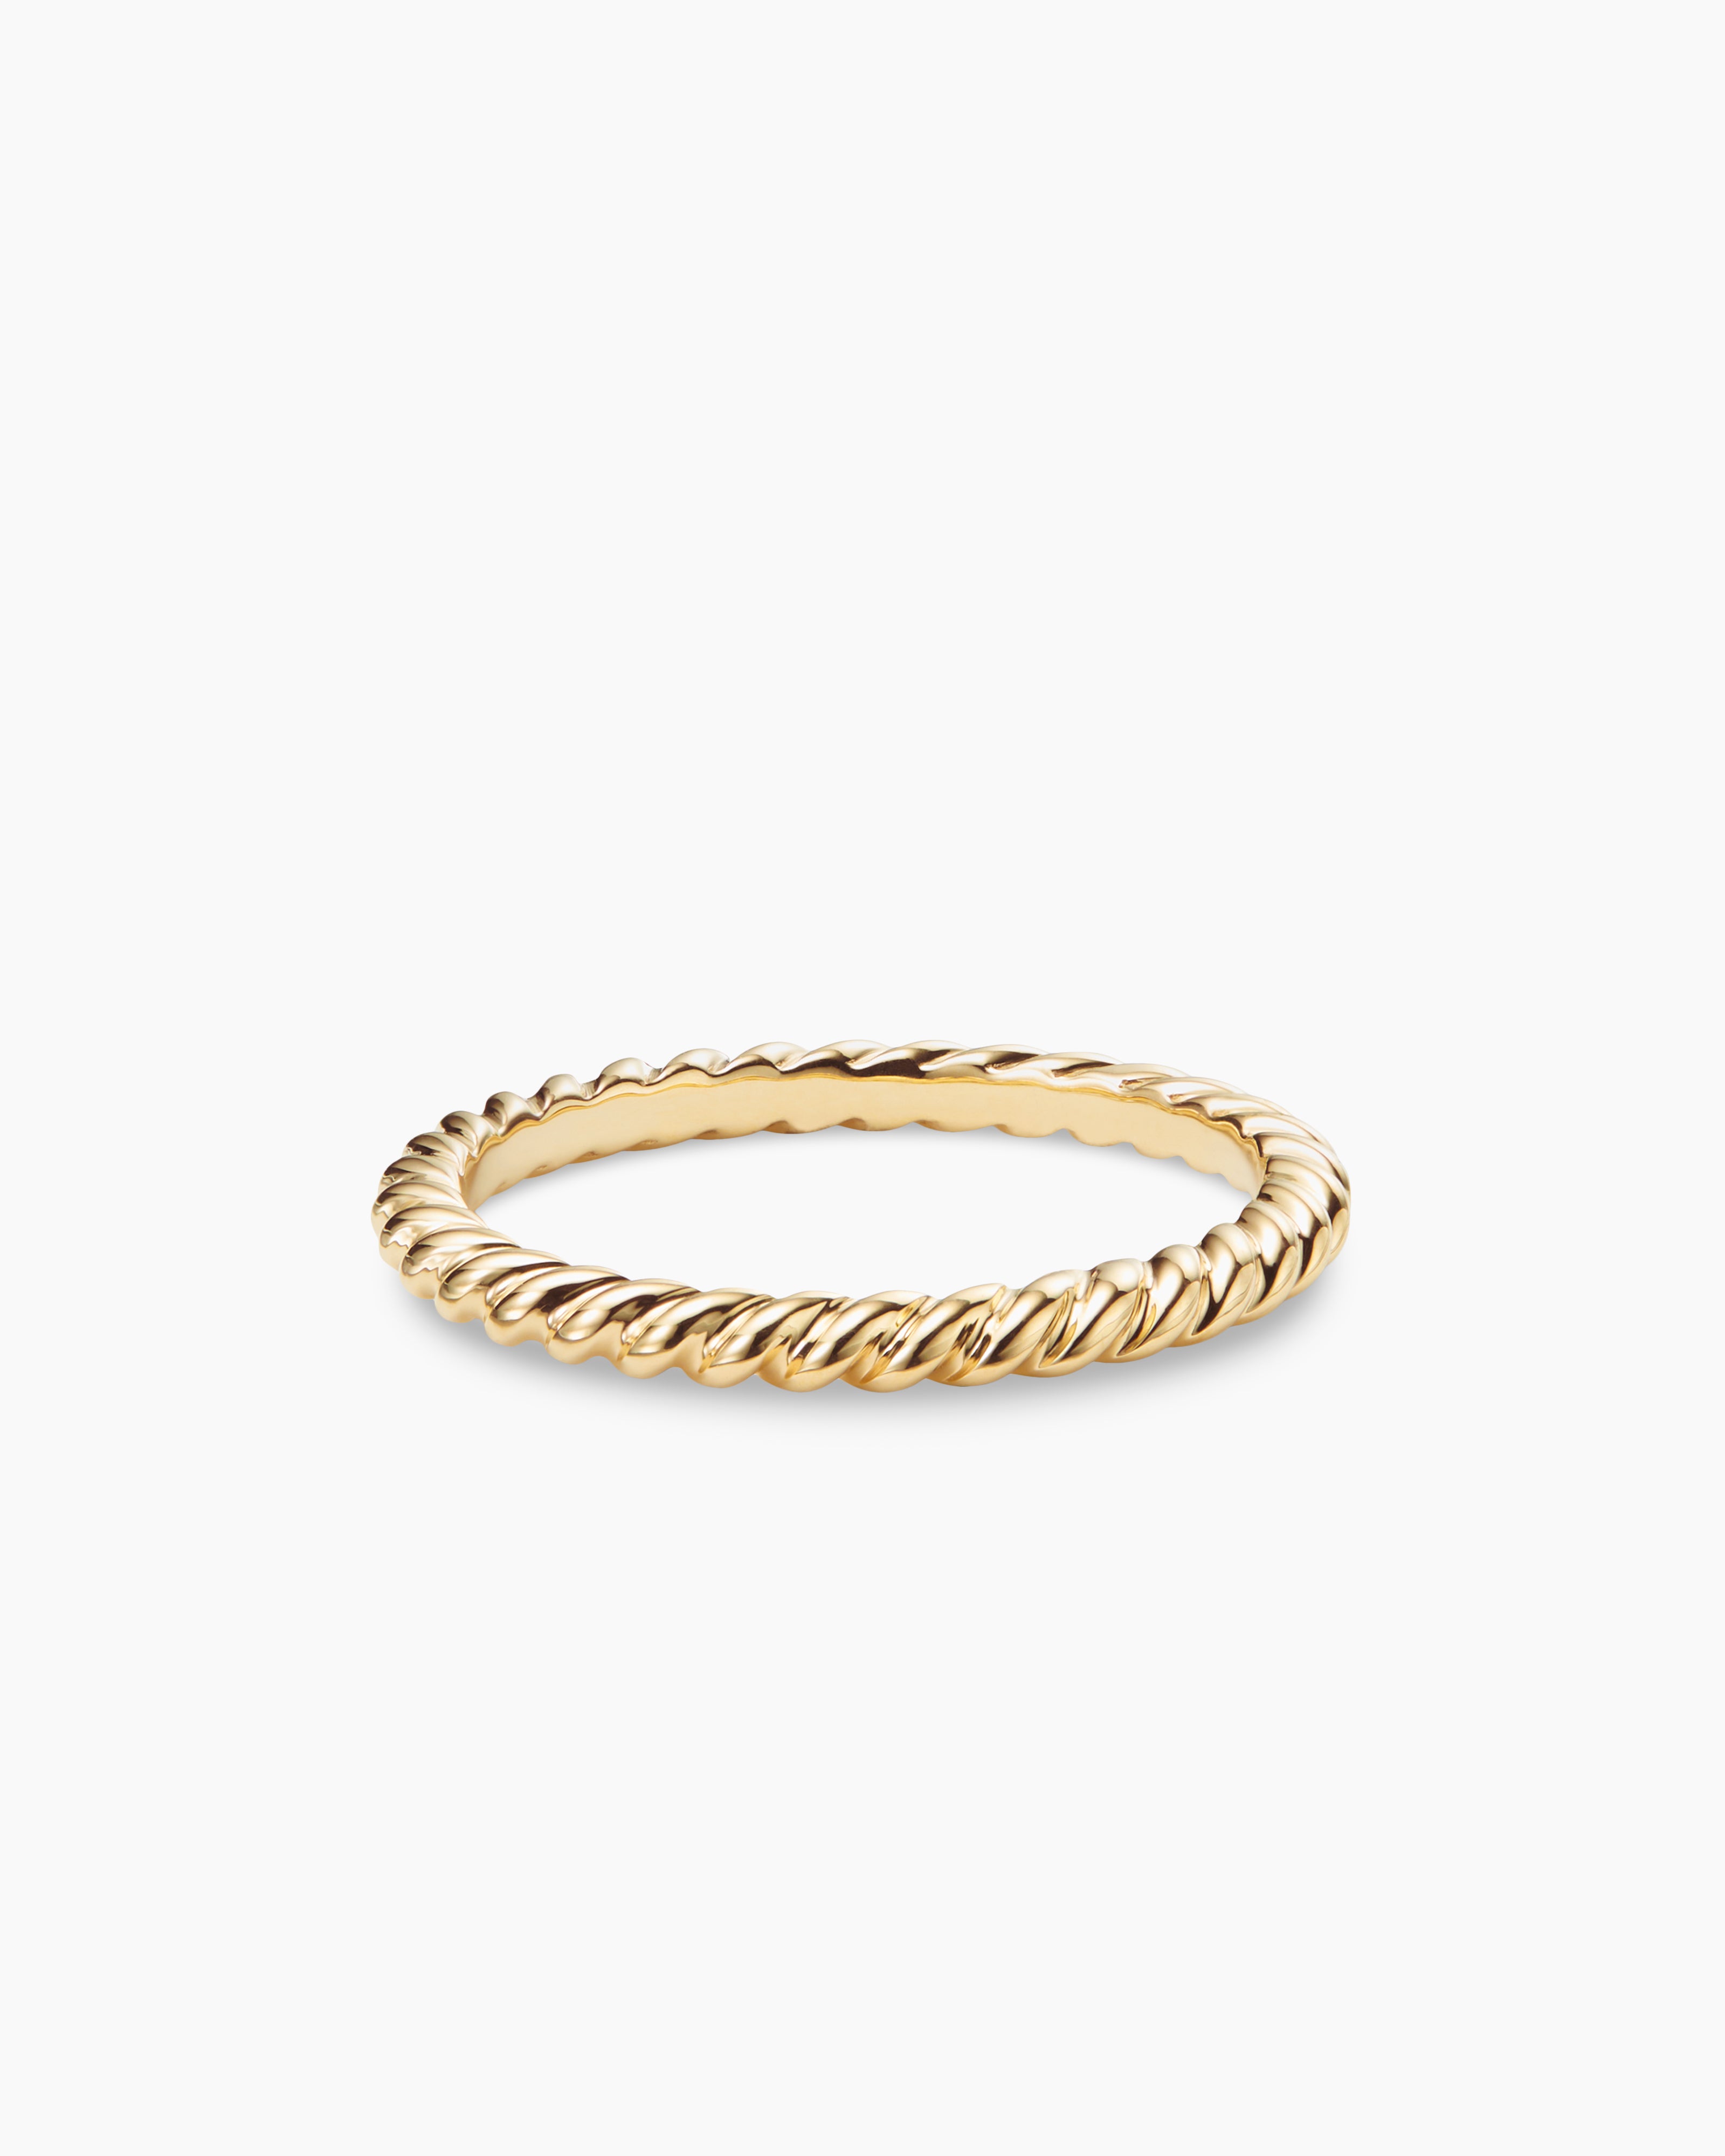 What Size Life Ring Do I Need?